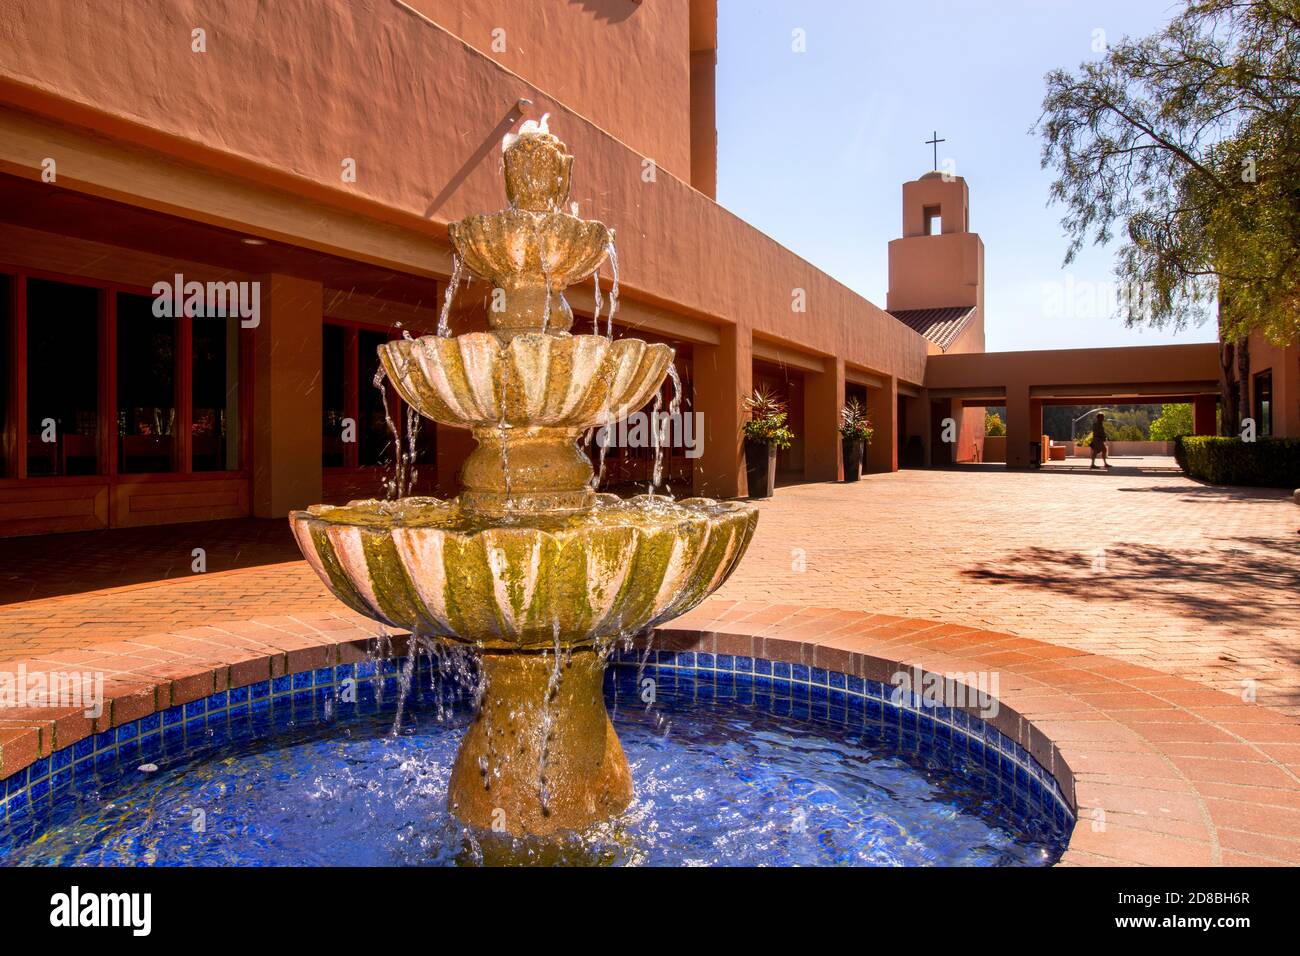 A cool fountain bubbles in afternoon sun in the courtyard of a Catholic church in Southern California. Stock Photo